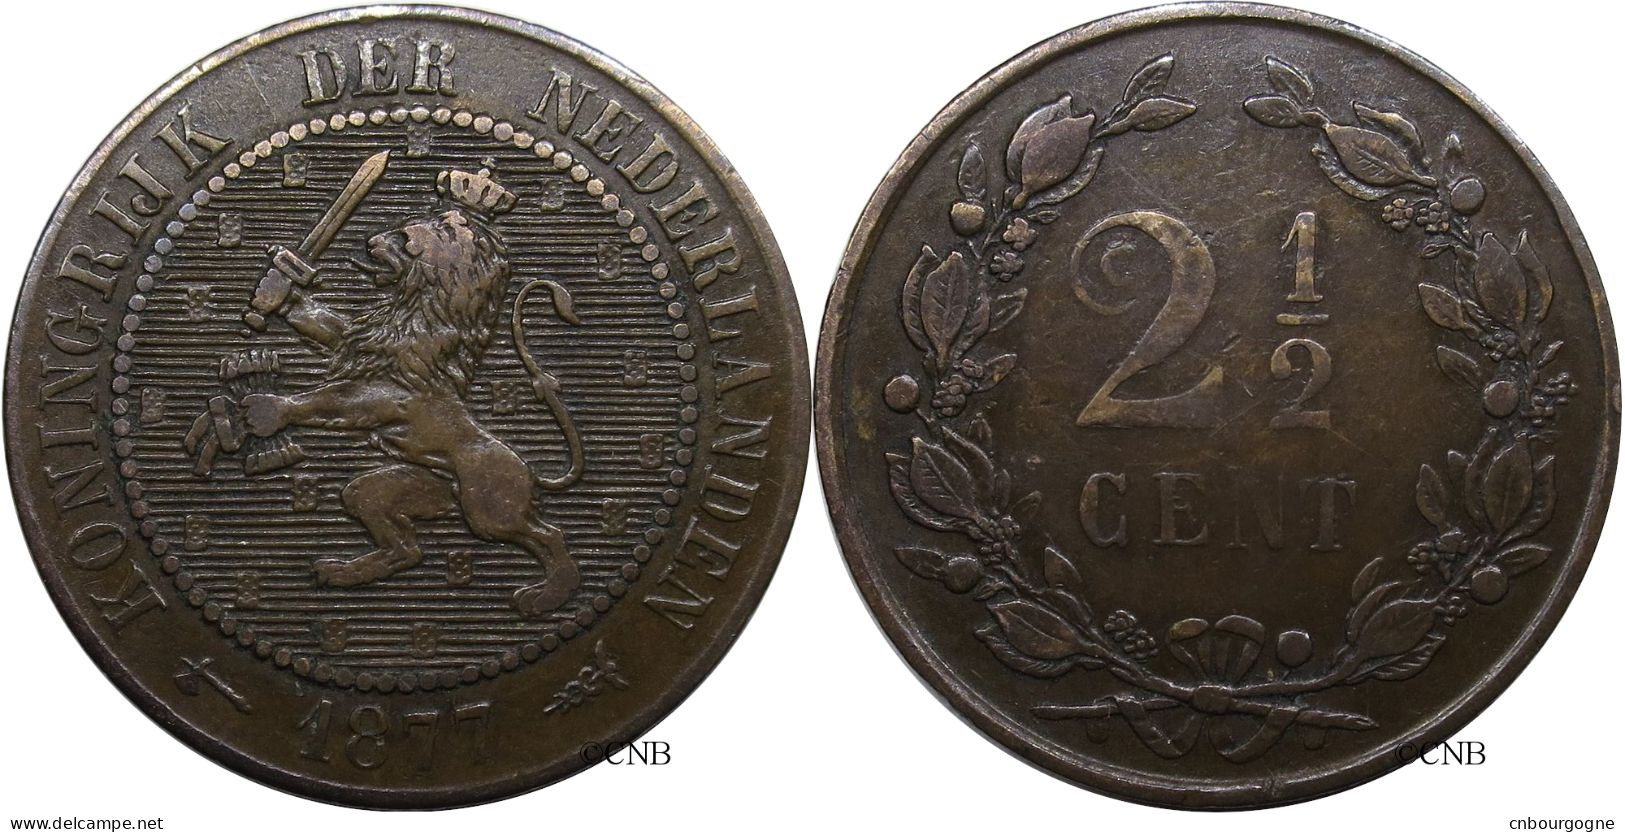 Pays-Bas - Royaume - Guillaume III - 2 1/2 Cents 1877 - TTB/XF40 - Mon3538 - 1849-1890: Willem III.